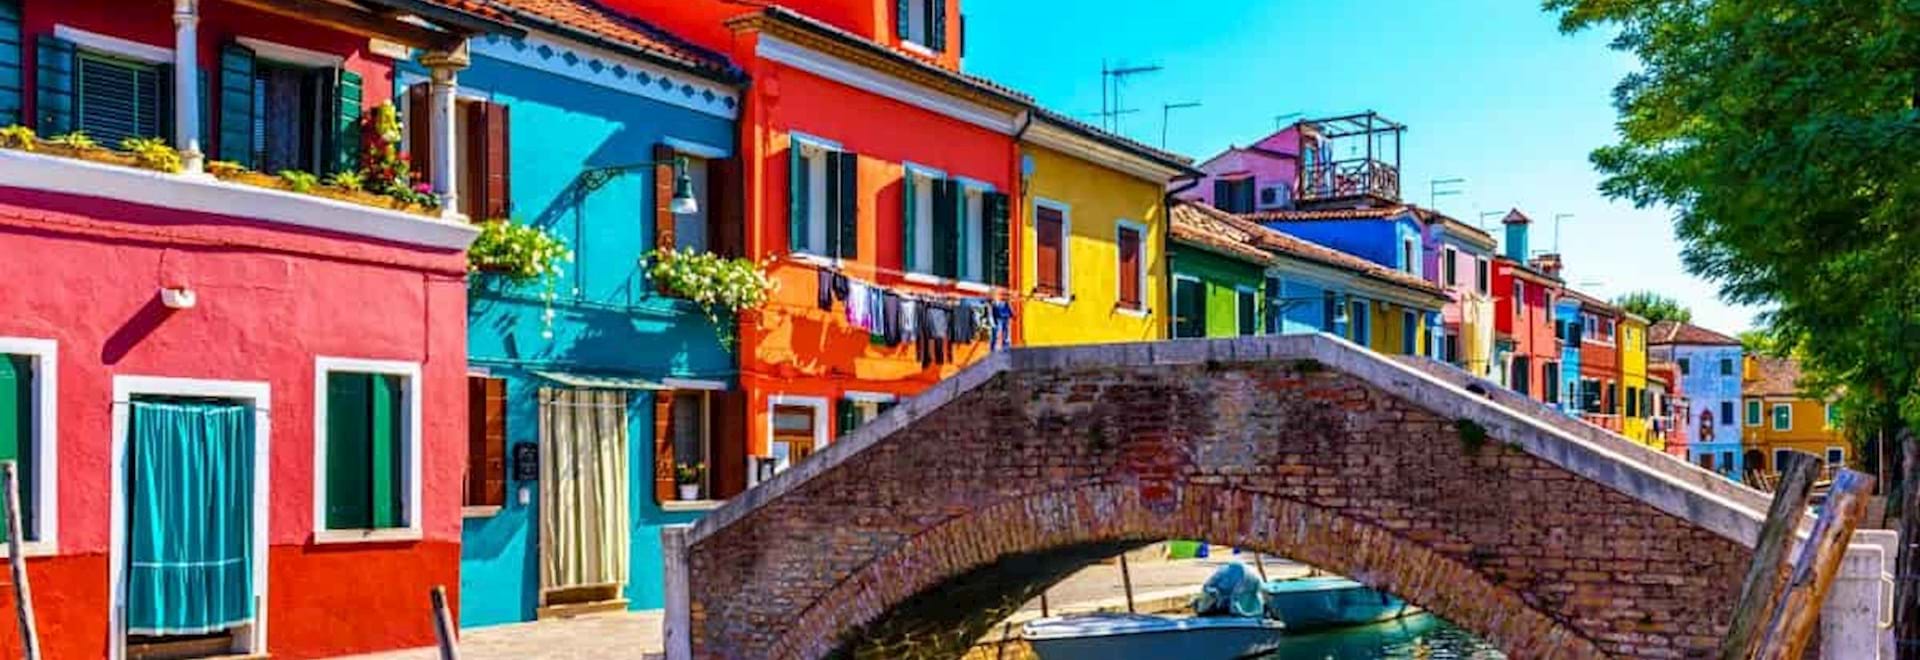 stunning view of Burano's canal